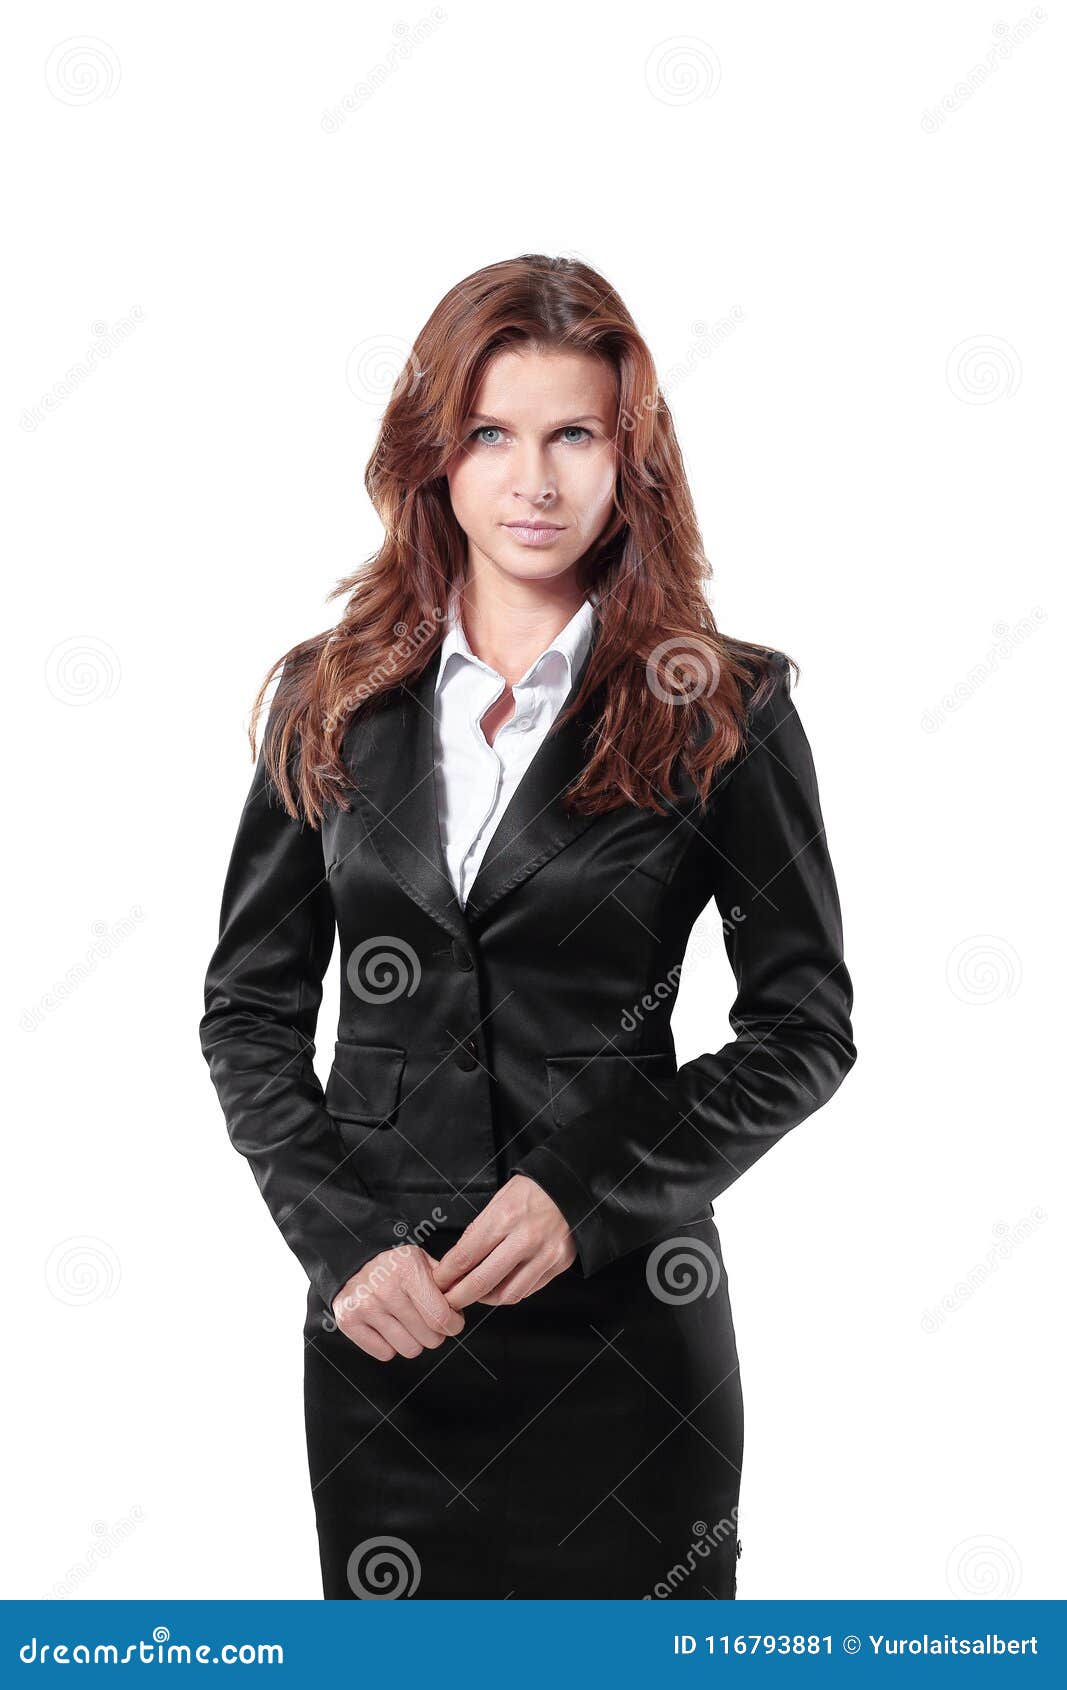 Portrait of Serious Business Woman in Business Suit Stock Image - Image ...